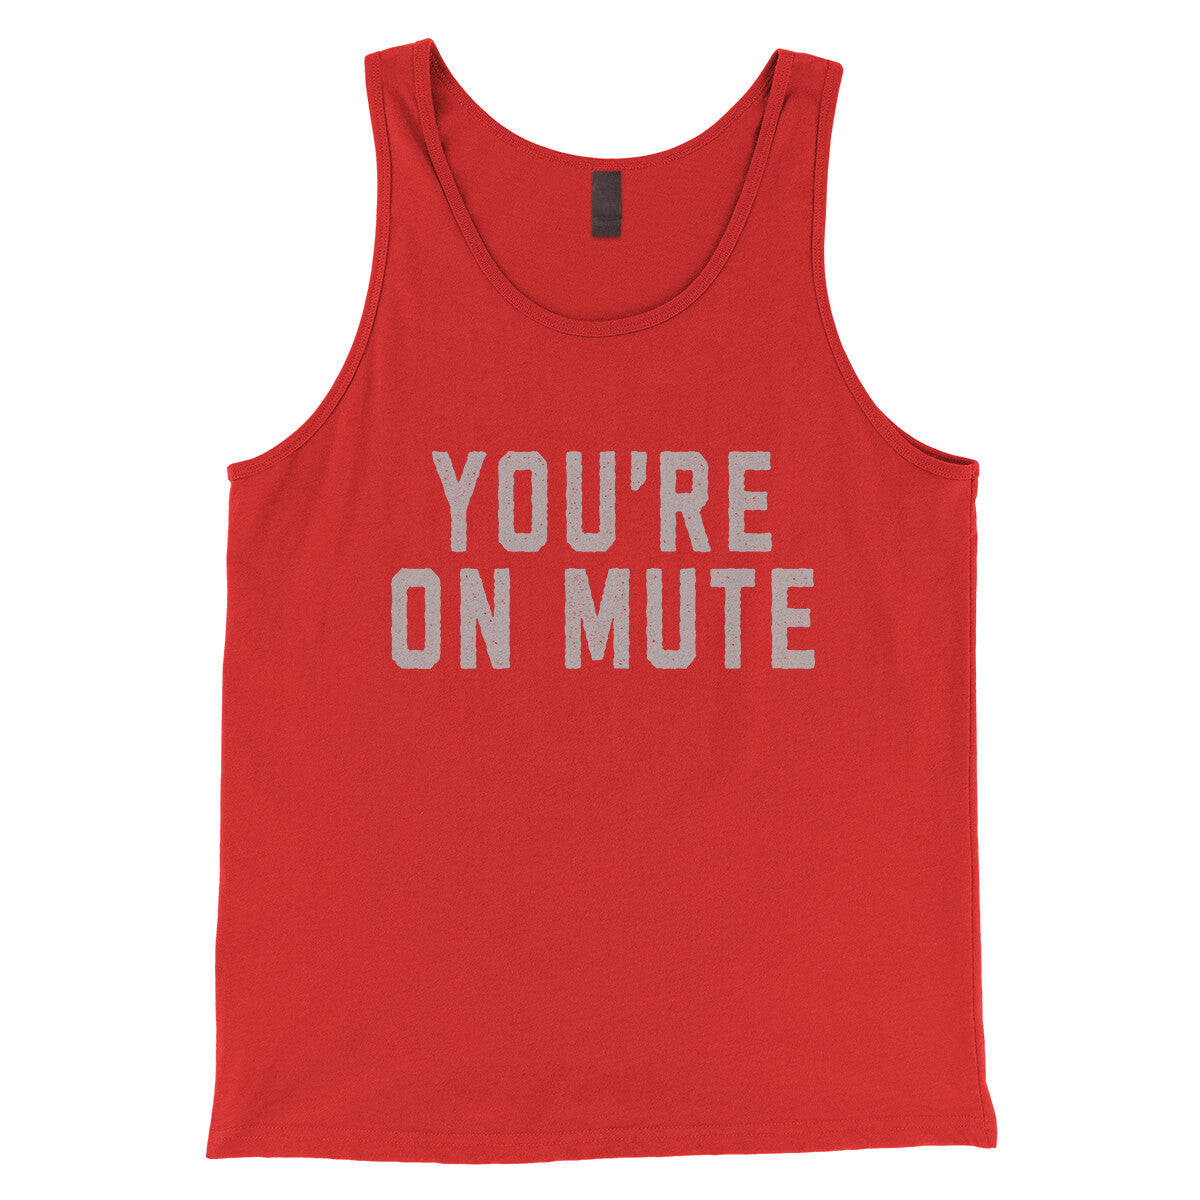 You're on Mute in Red Color